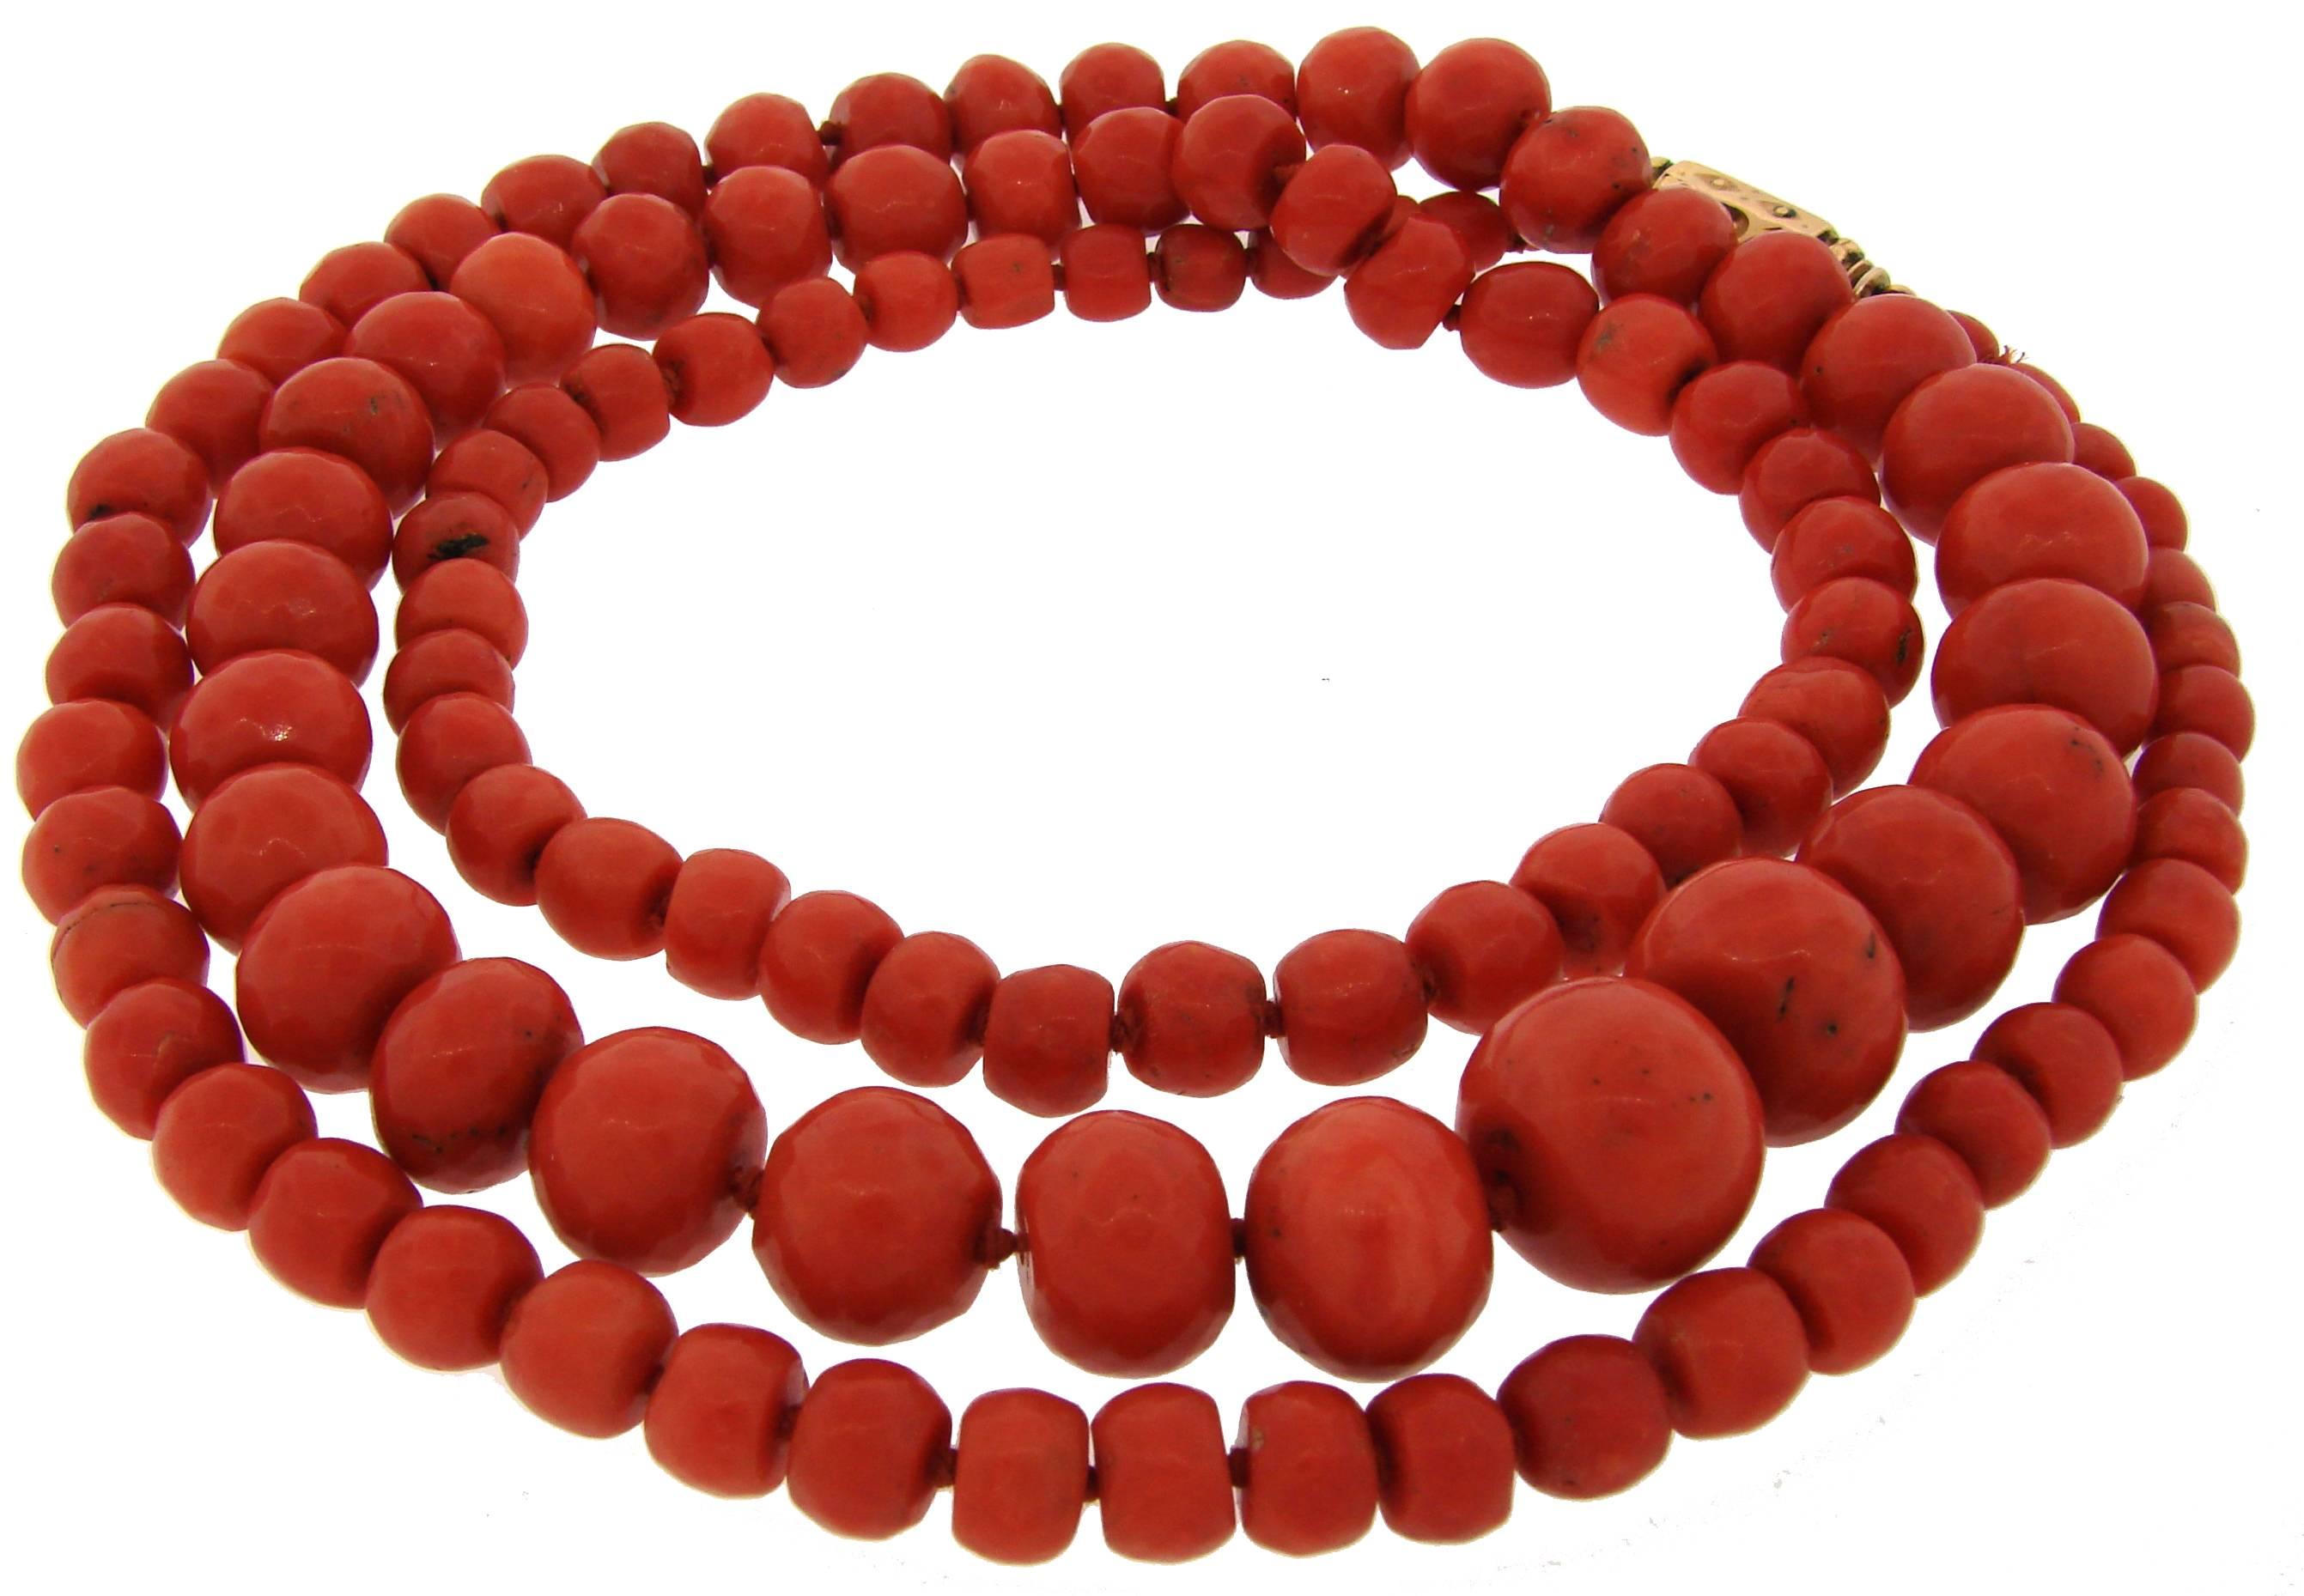 Gorgeous Victorian strand of Mediterranean coral beads finished with yellow gold clasp decorated with enamel. The beads are graduating from 17.25 x 14.54 mm in the center to 6.46 x 6.18 mm by the clasp which is made of 14k yellow gold.
The necklace